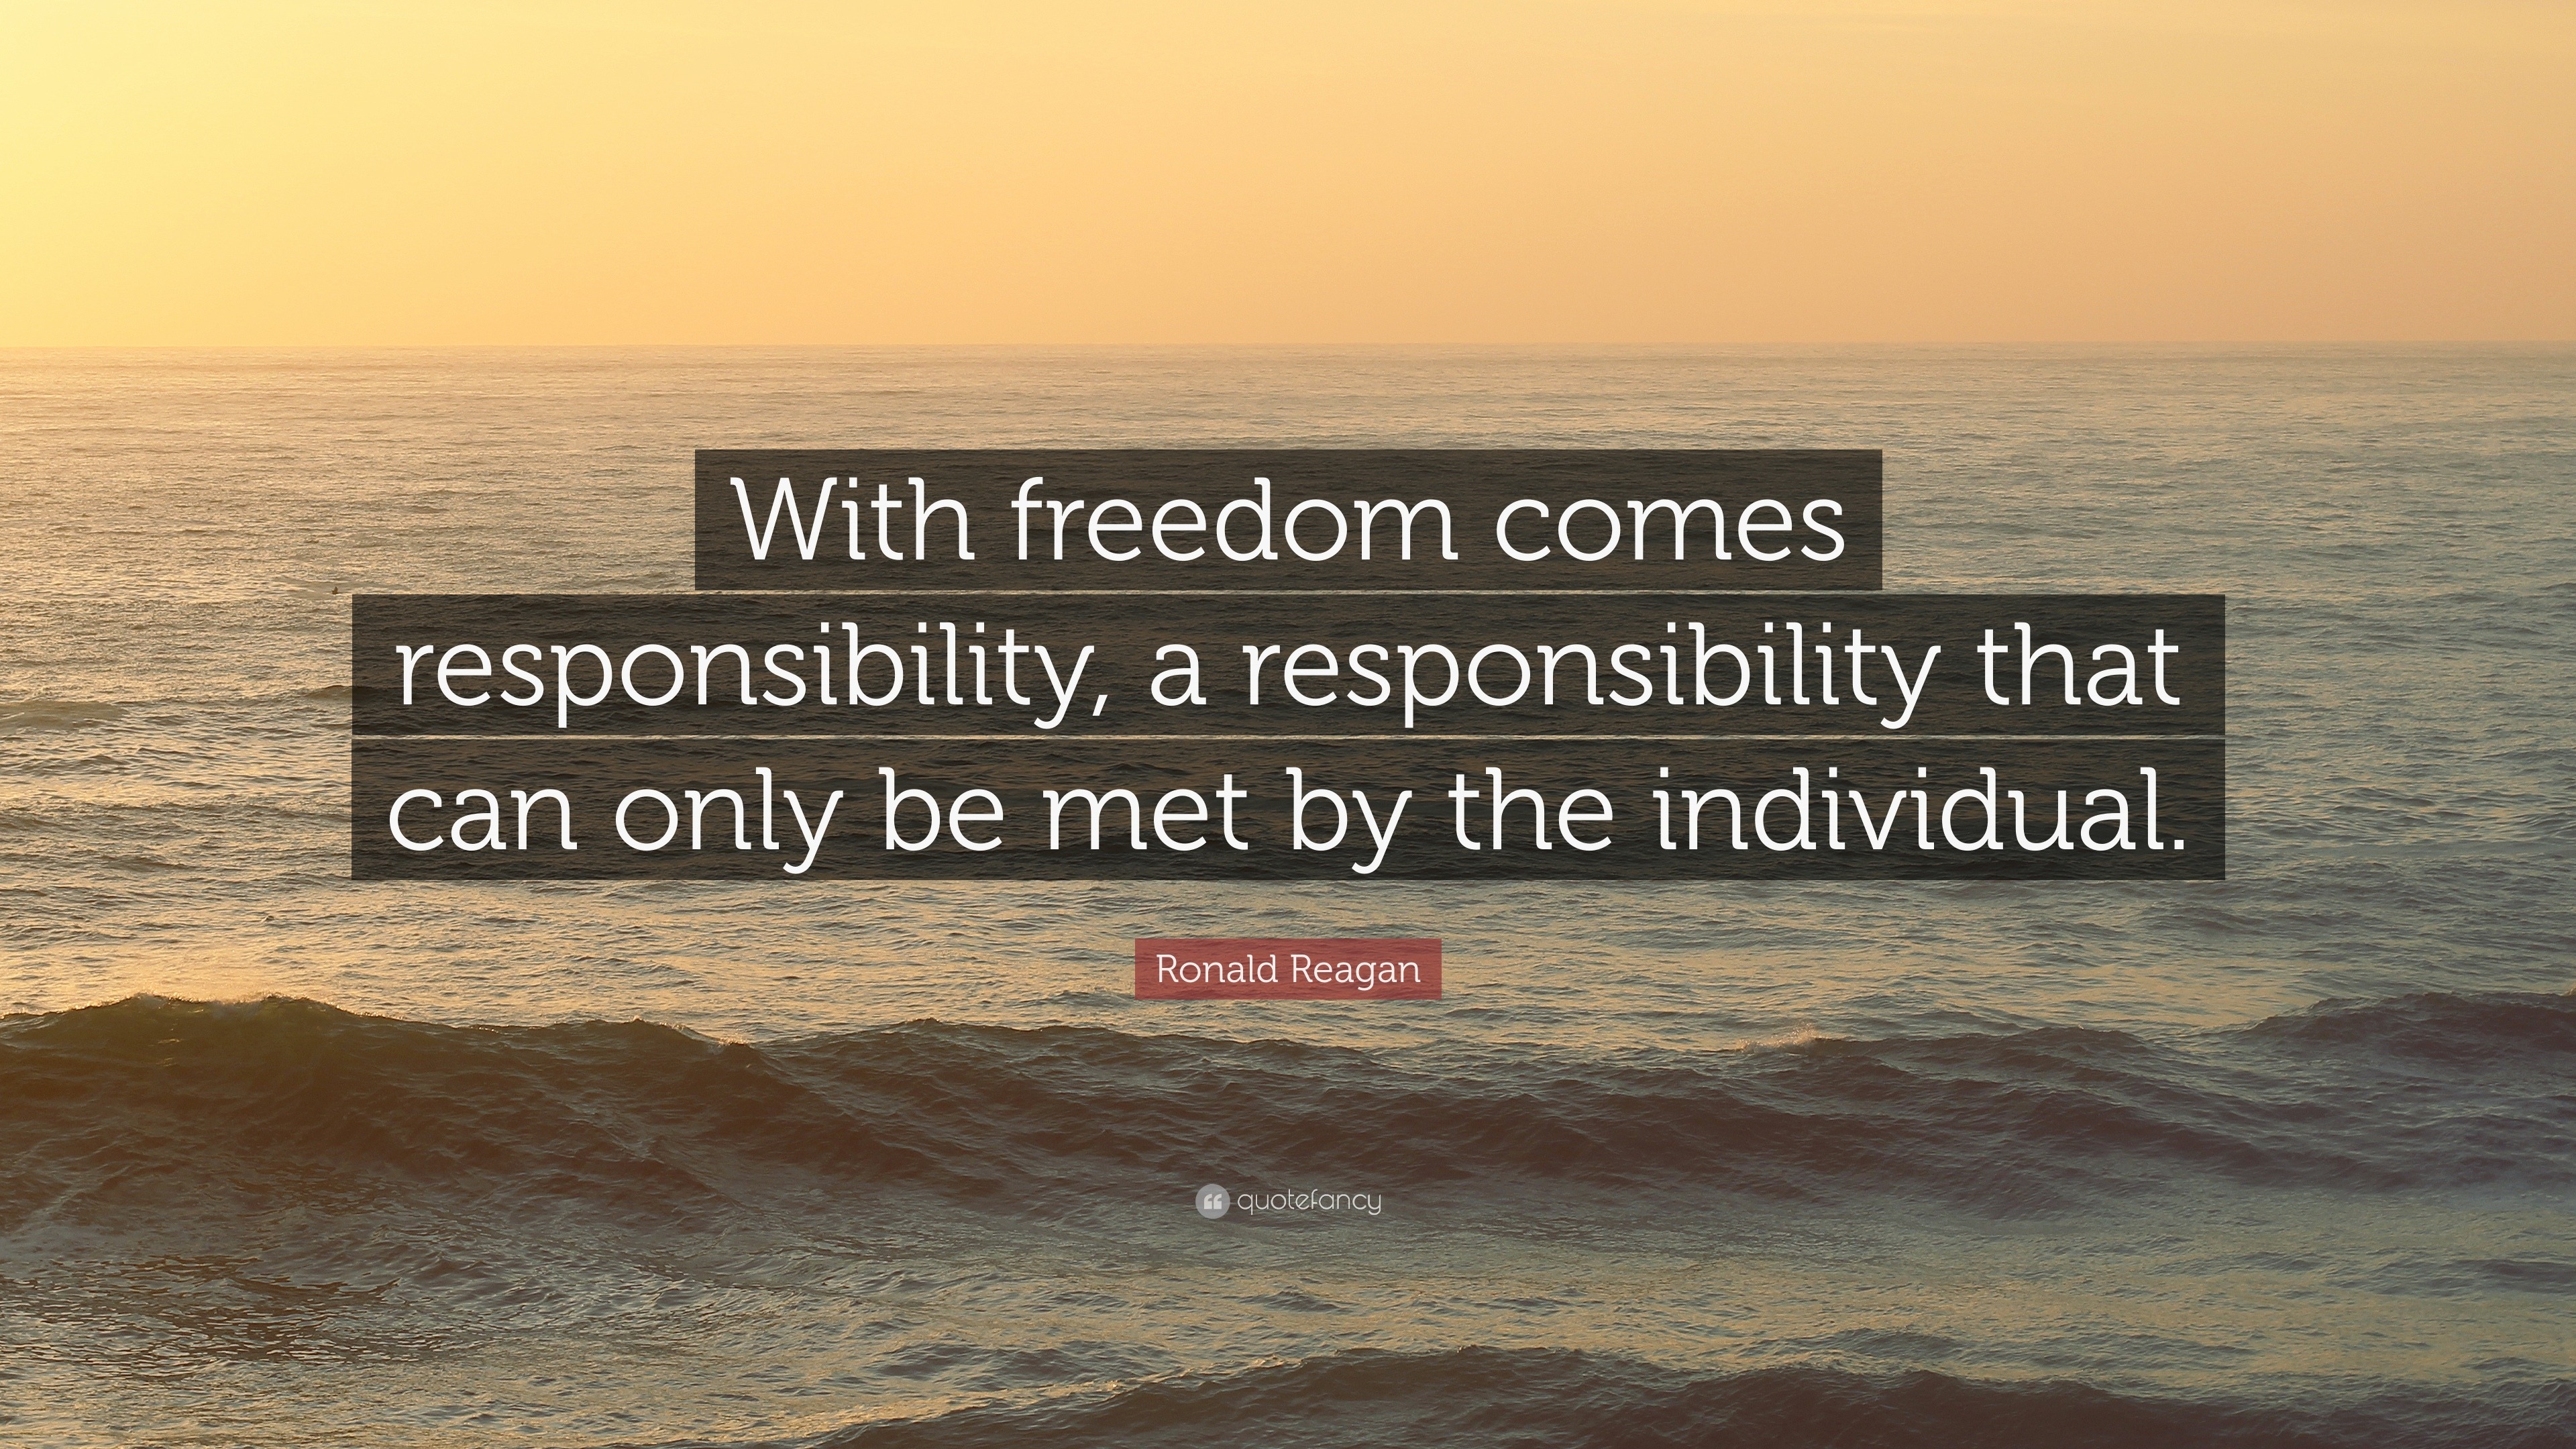 Ronald Reagan Quote: “With freedom comes responsibility, a